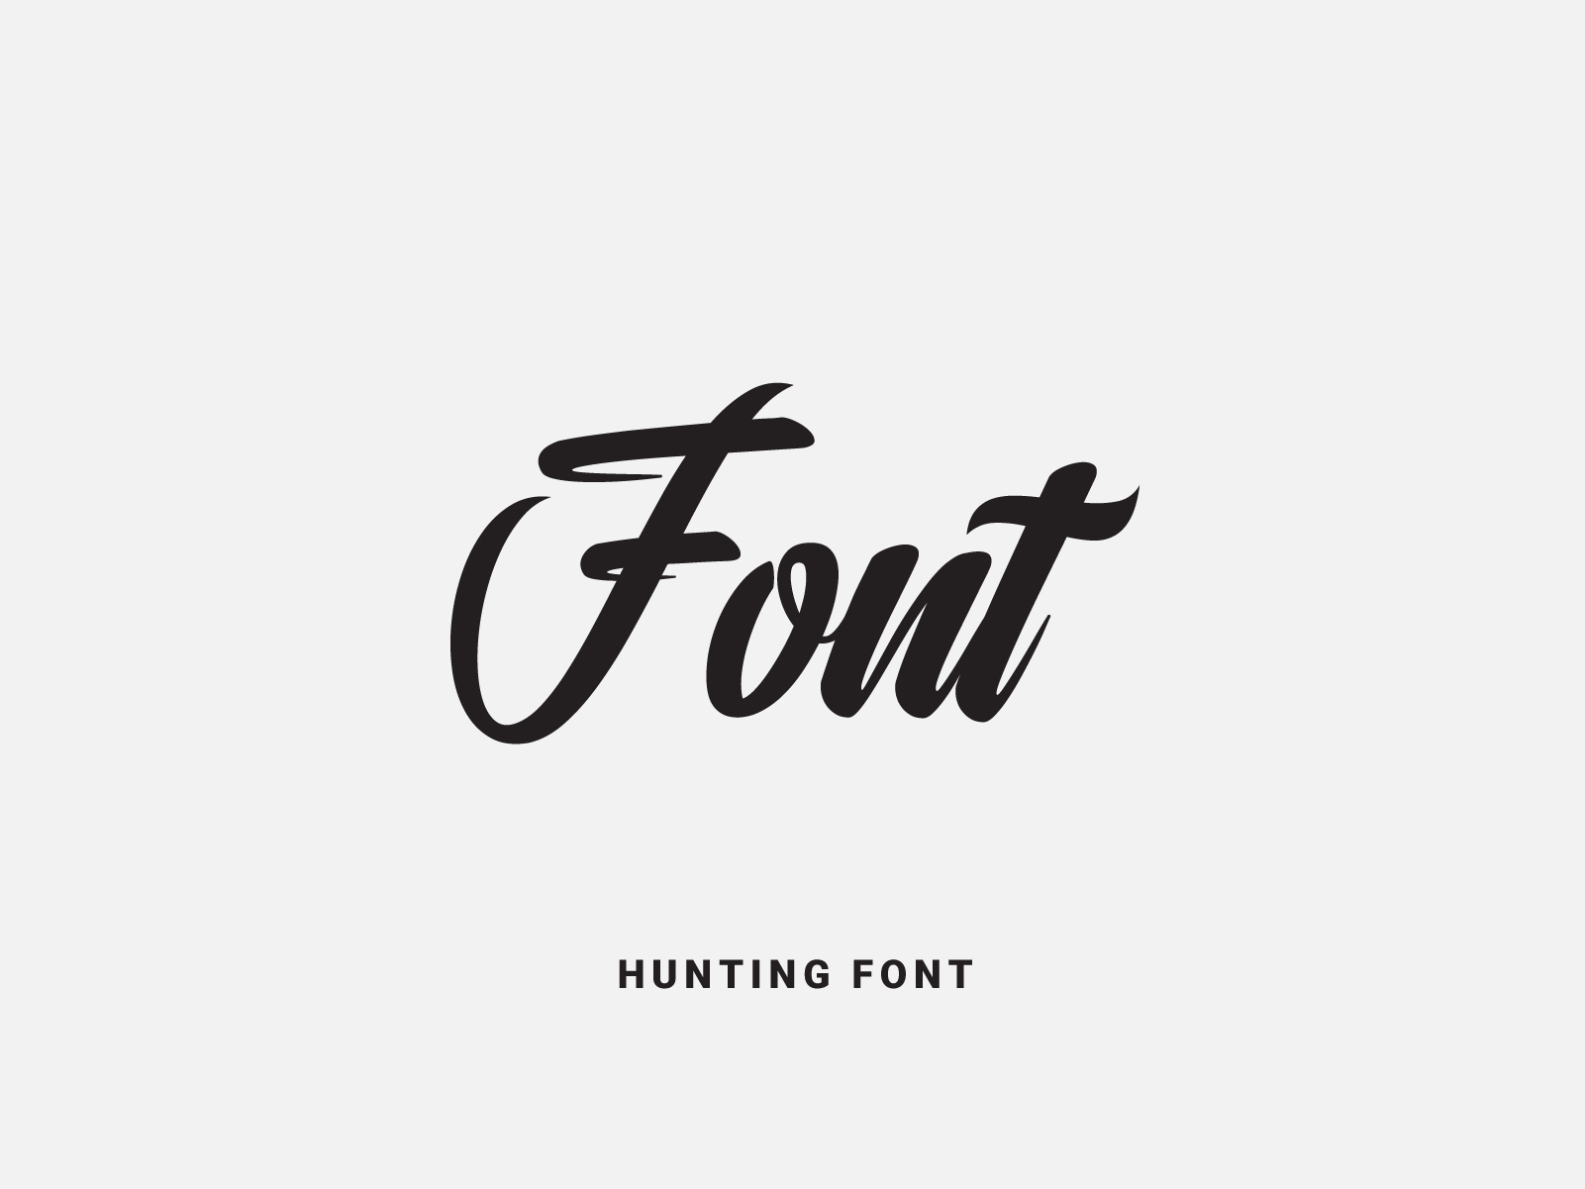 Hunting Font by Victor on Dribbble